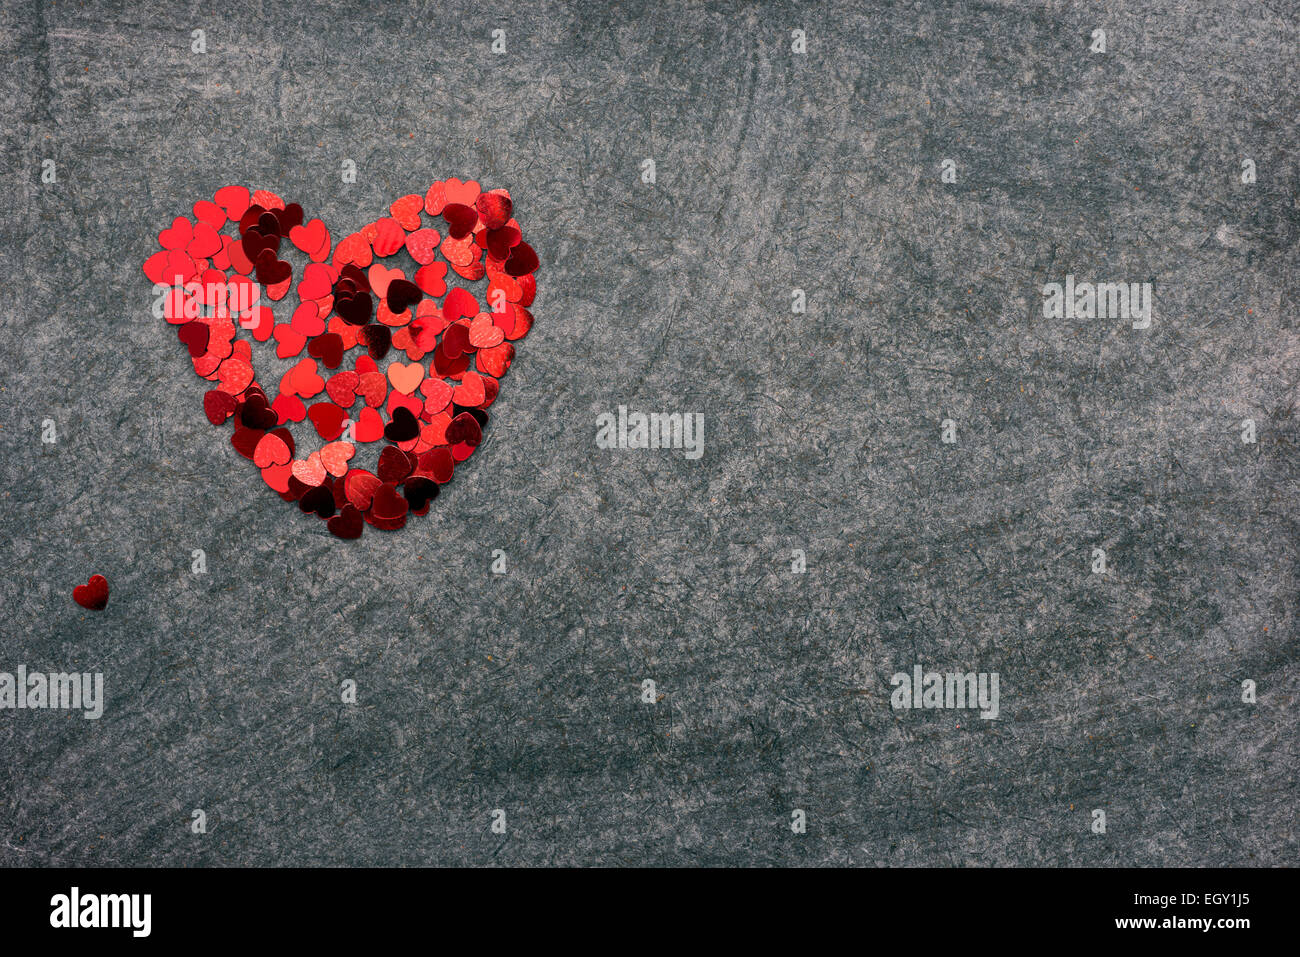 heart figure made from red confetti pieces on blackboard Stock Photo